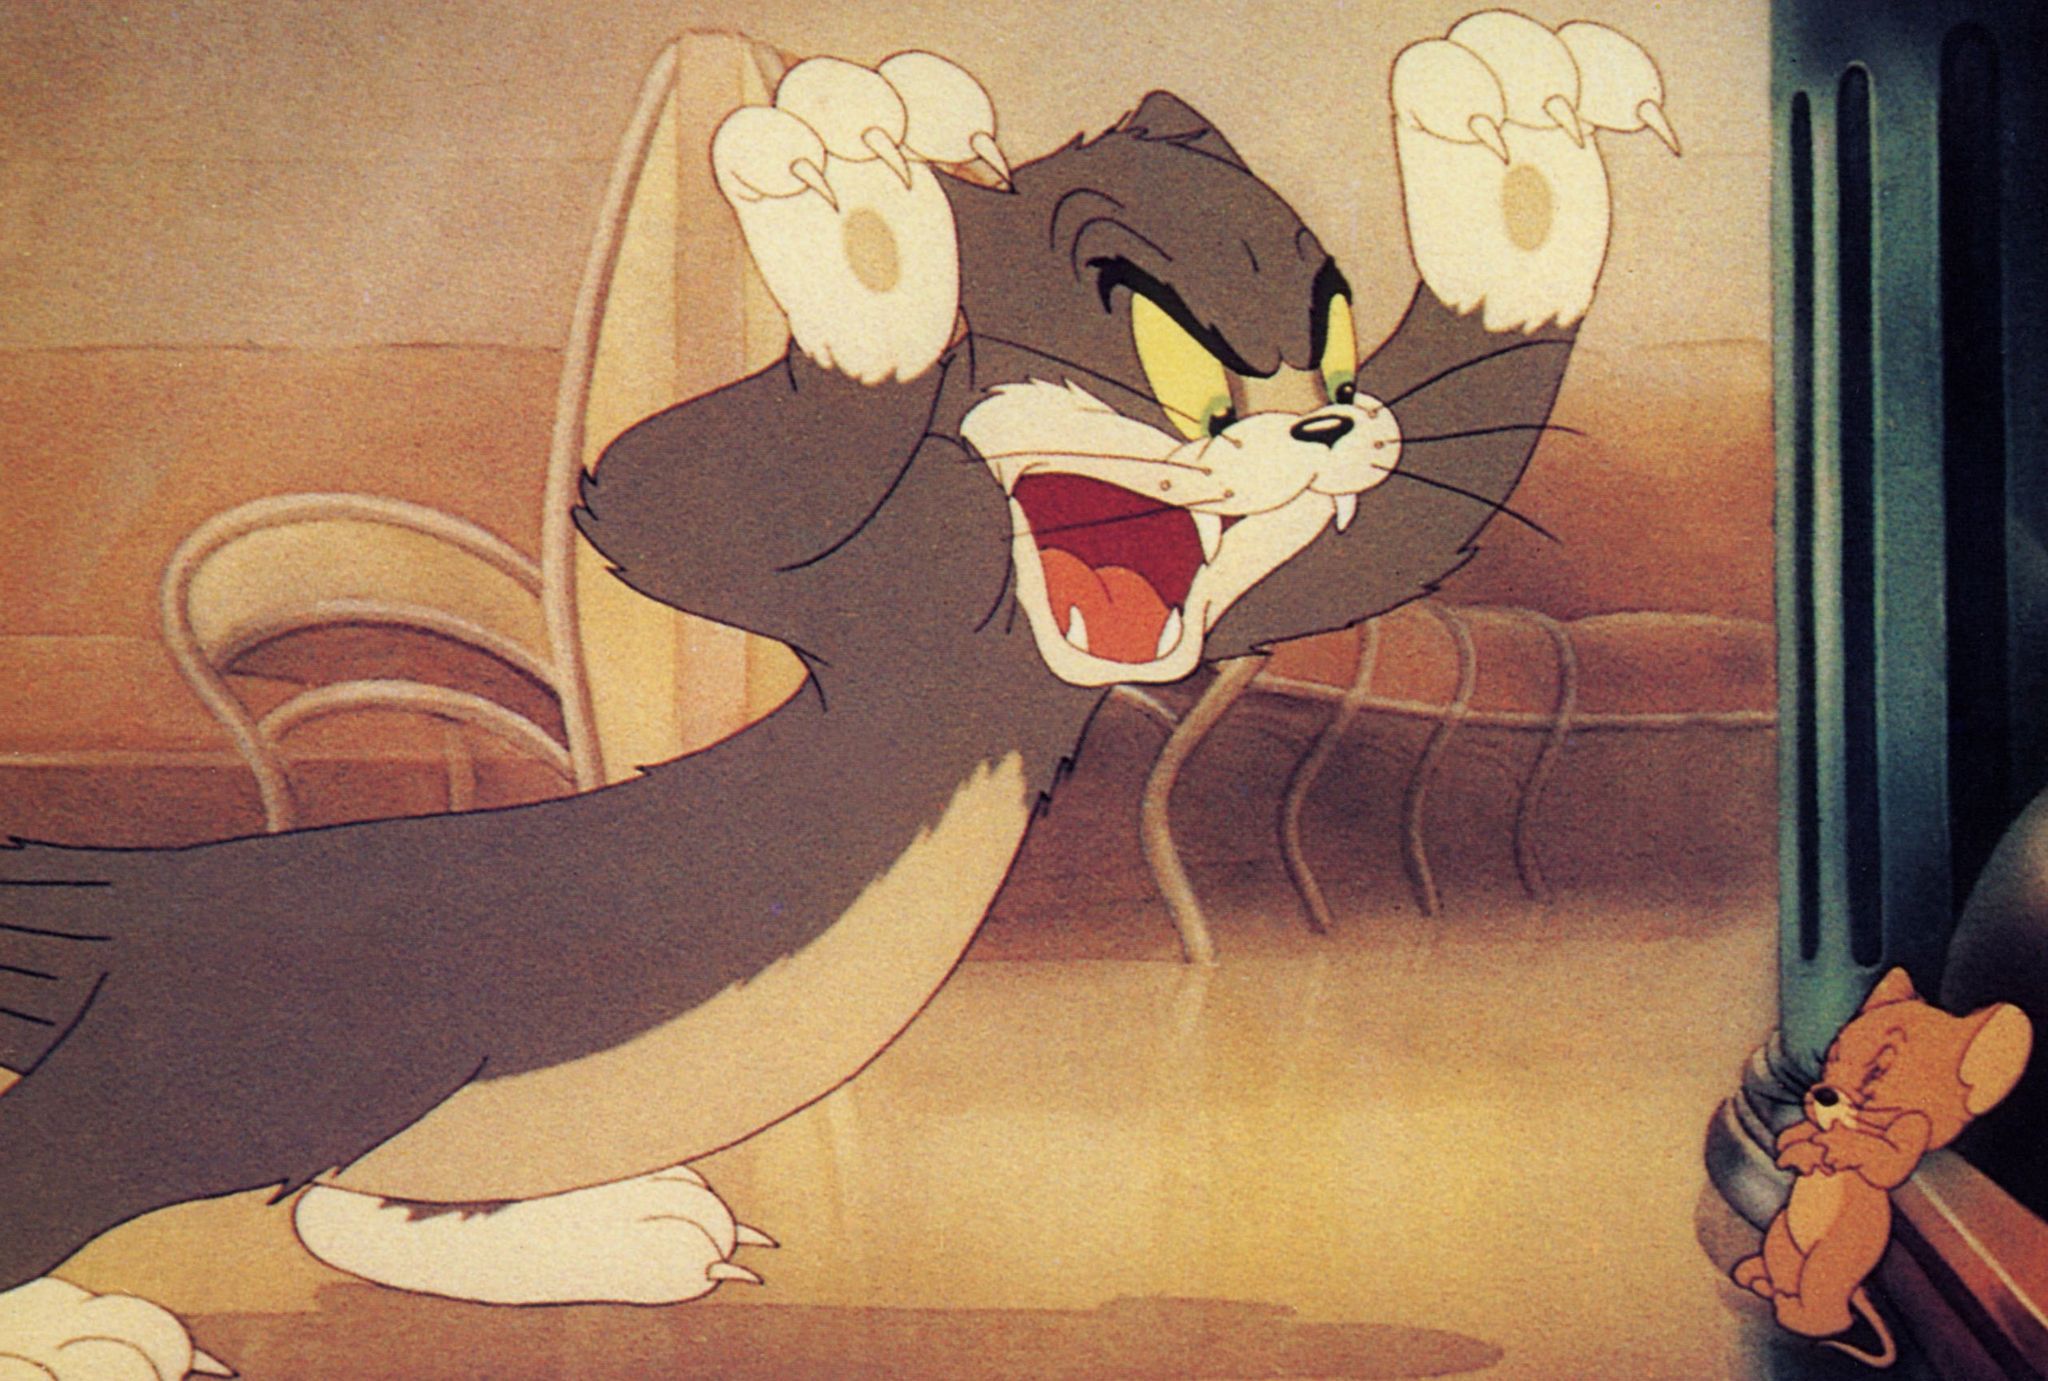 Tom and Jerry: 80 years of cat v mouse